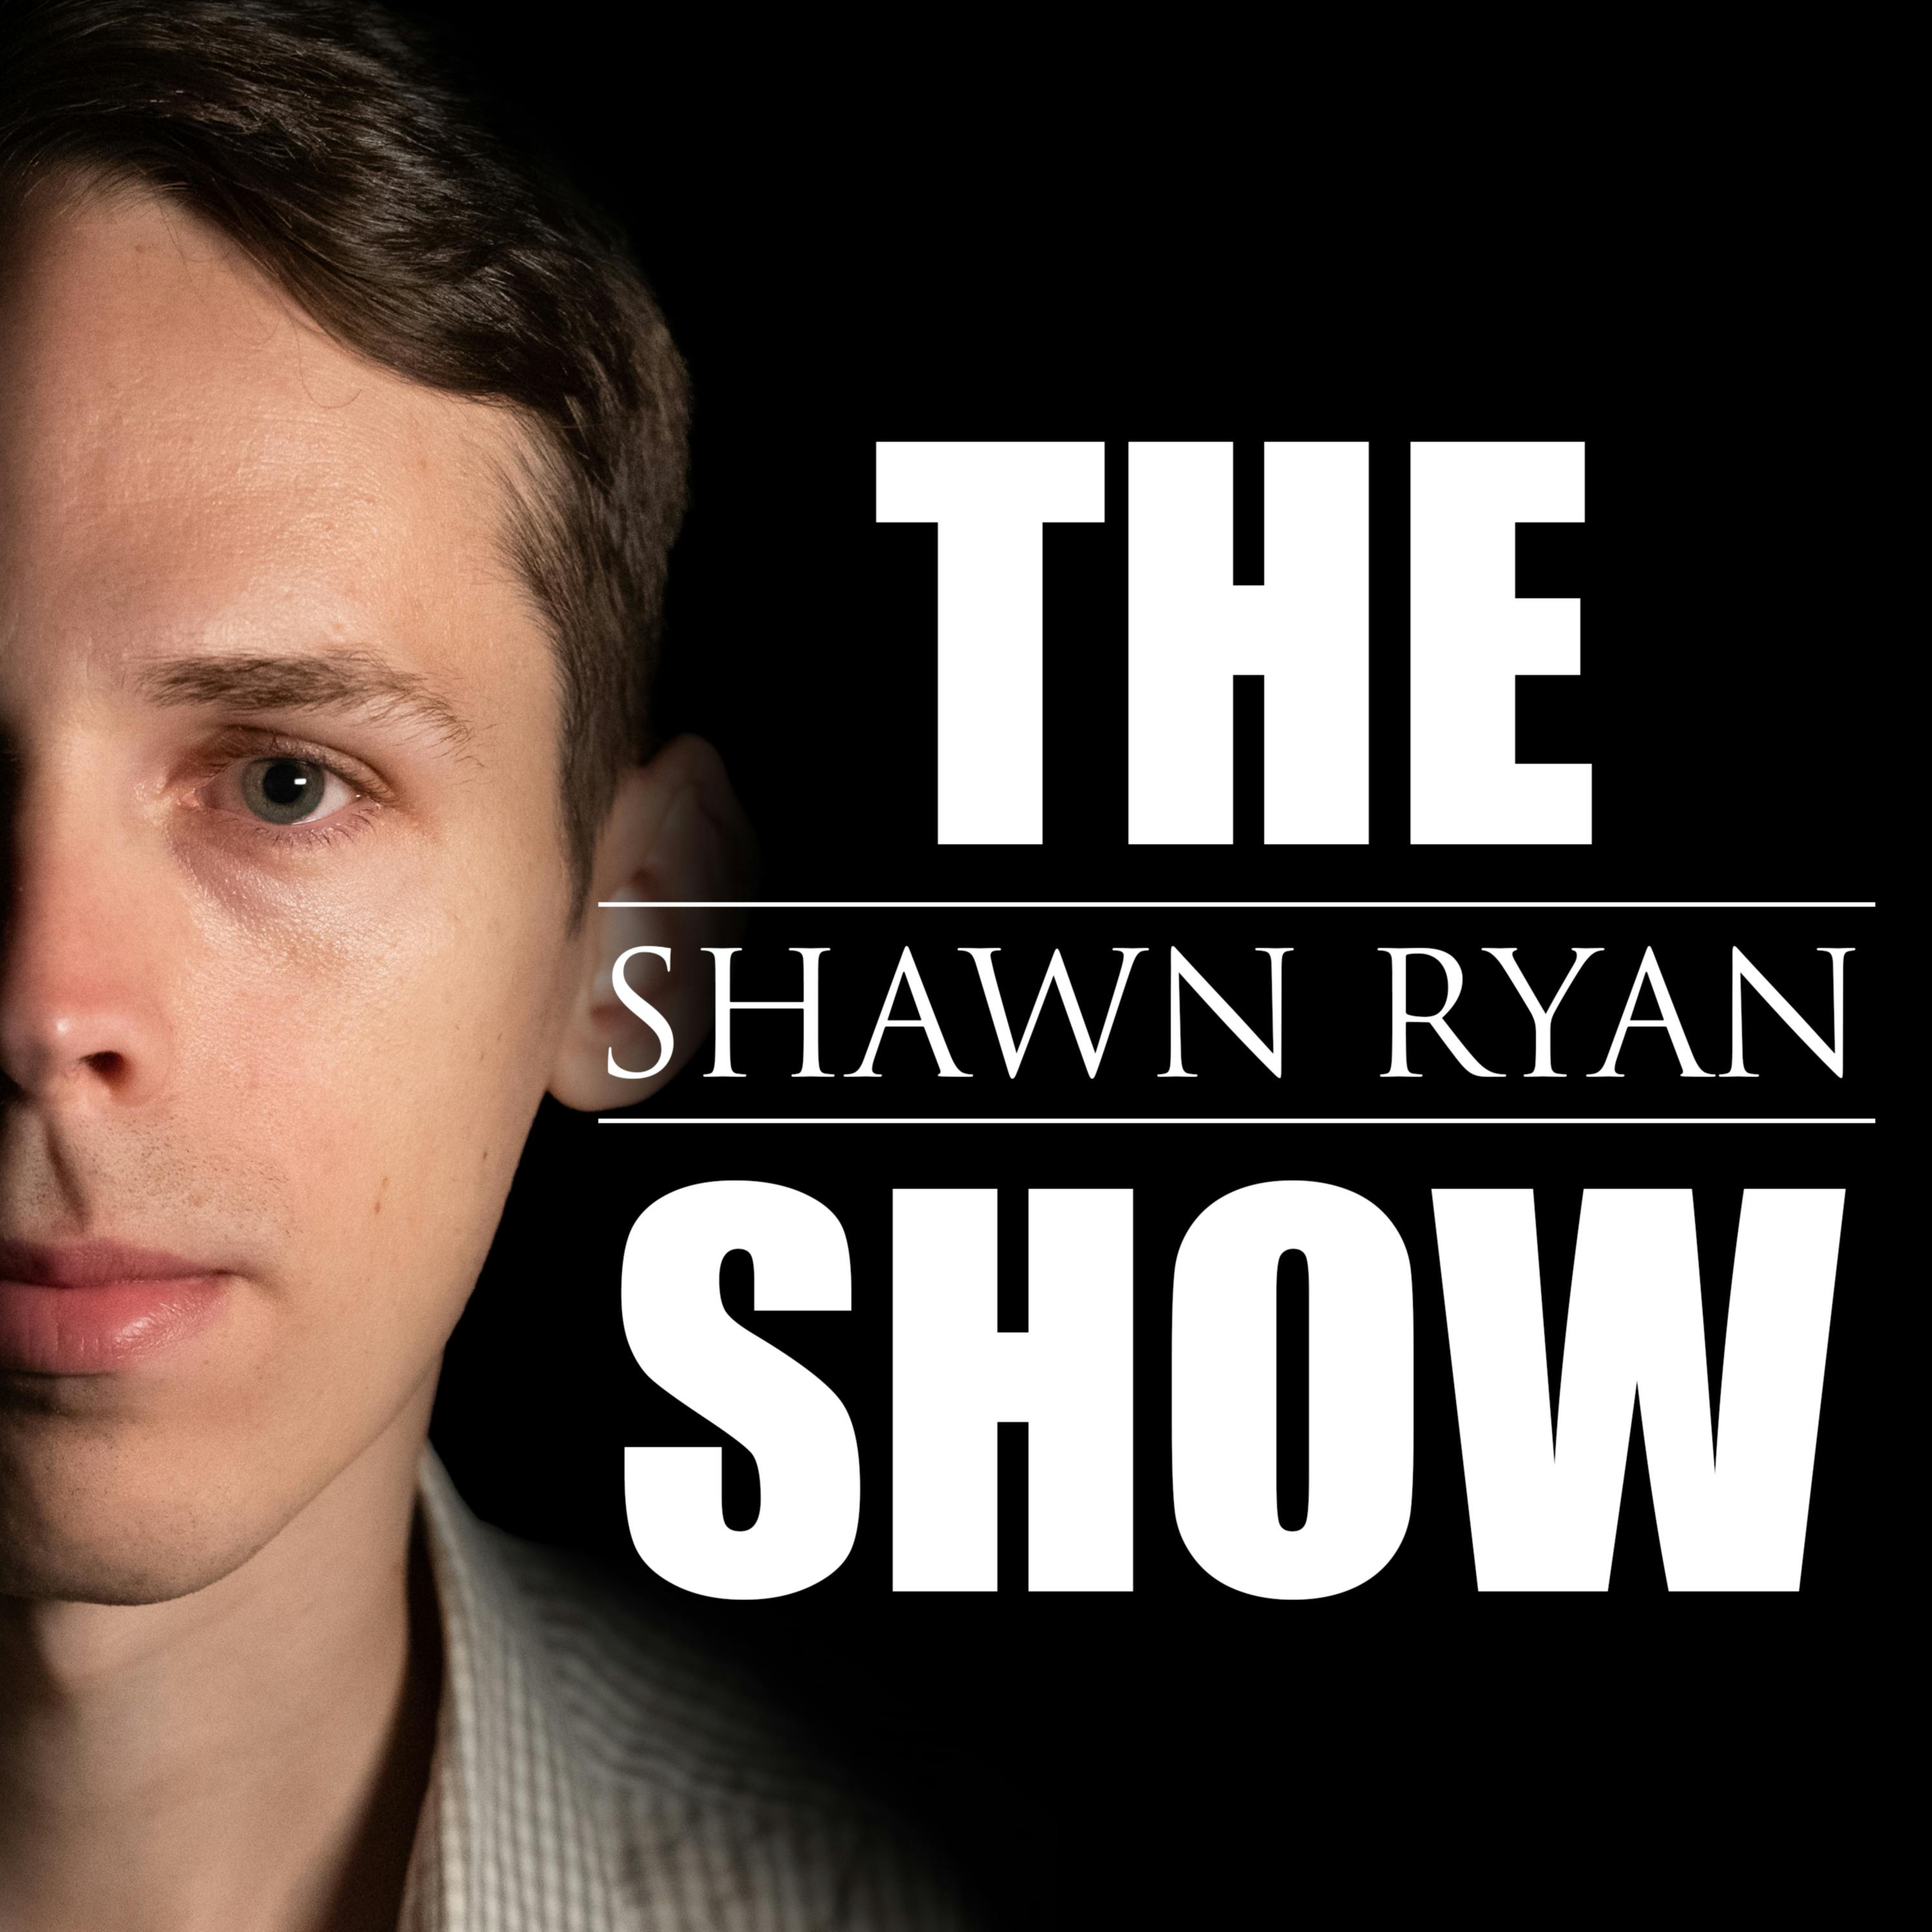 #56 Ryan Montgomery - #1 Ethical Hacker Who Hunts Child Predators Catches One Live On Podcast by Shawn Ryan | Cumulus Podcast Network